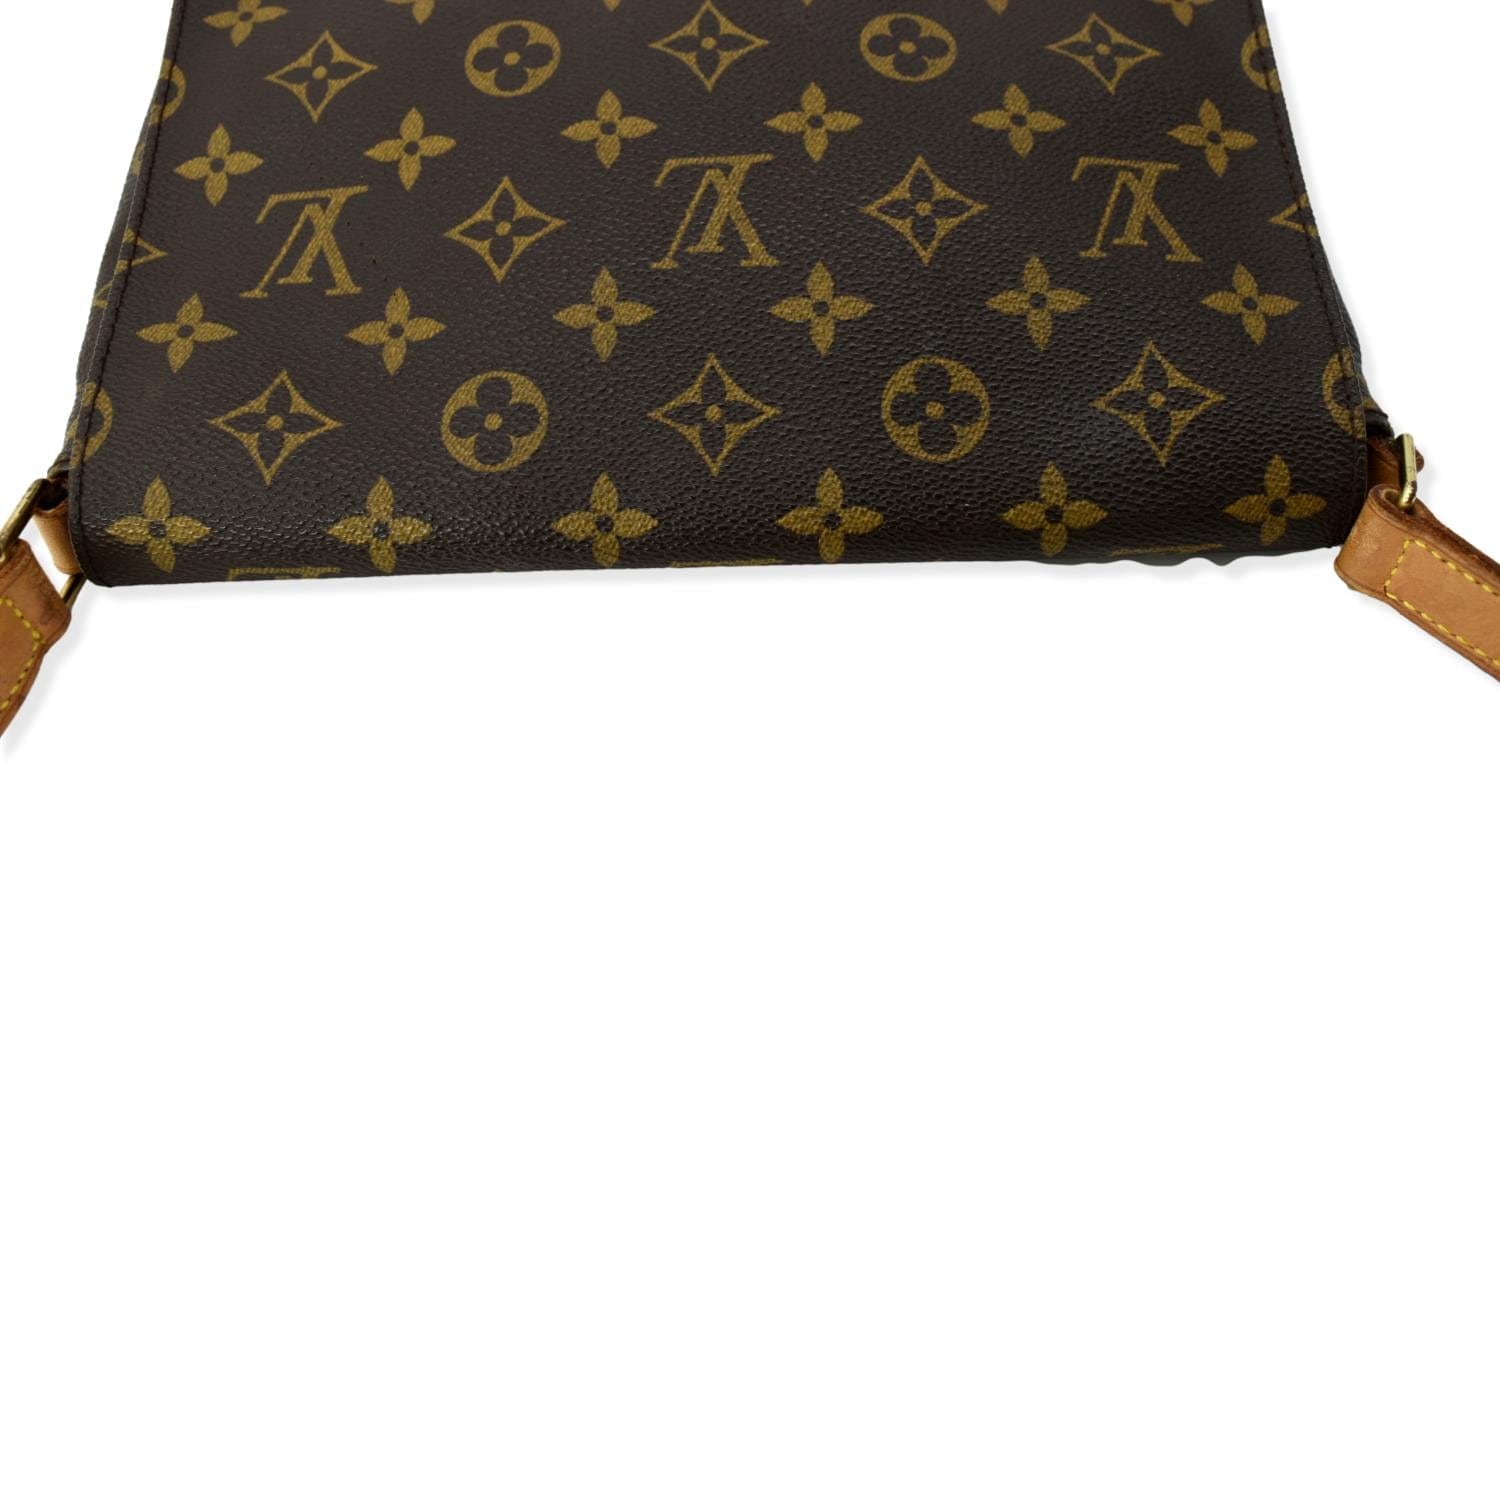 LOUIS VUITTON LOUIS VUITTON Musette Tango Long Shoulder Bag N51301 Damier  canvas Brown Used N51301｜Product Code：2101217329859｜BRAND OFF Online Store